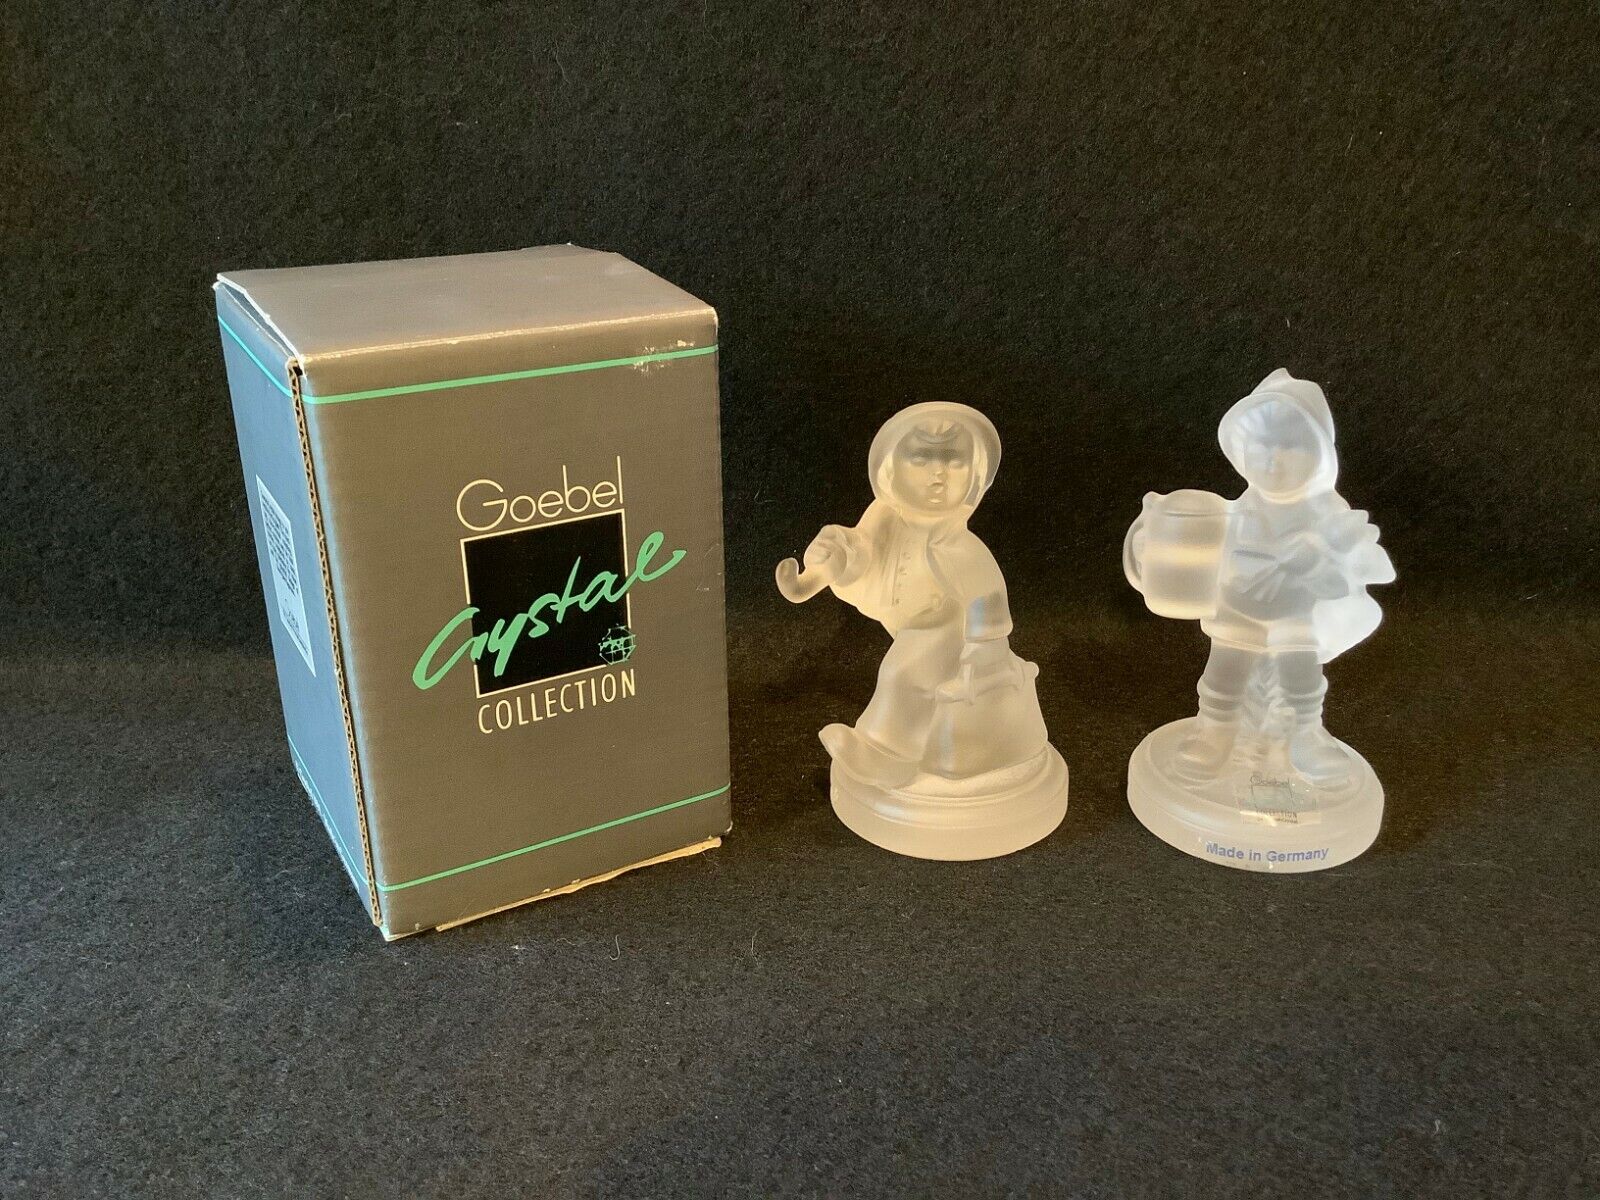 Goebel Crystal Collection, Set of 2 Figurines Vintage MCM Collectibles MCM